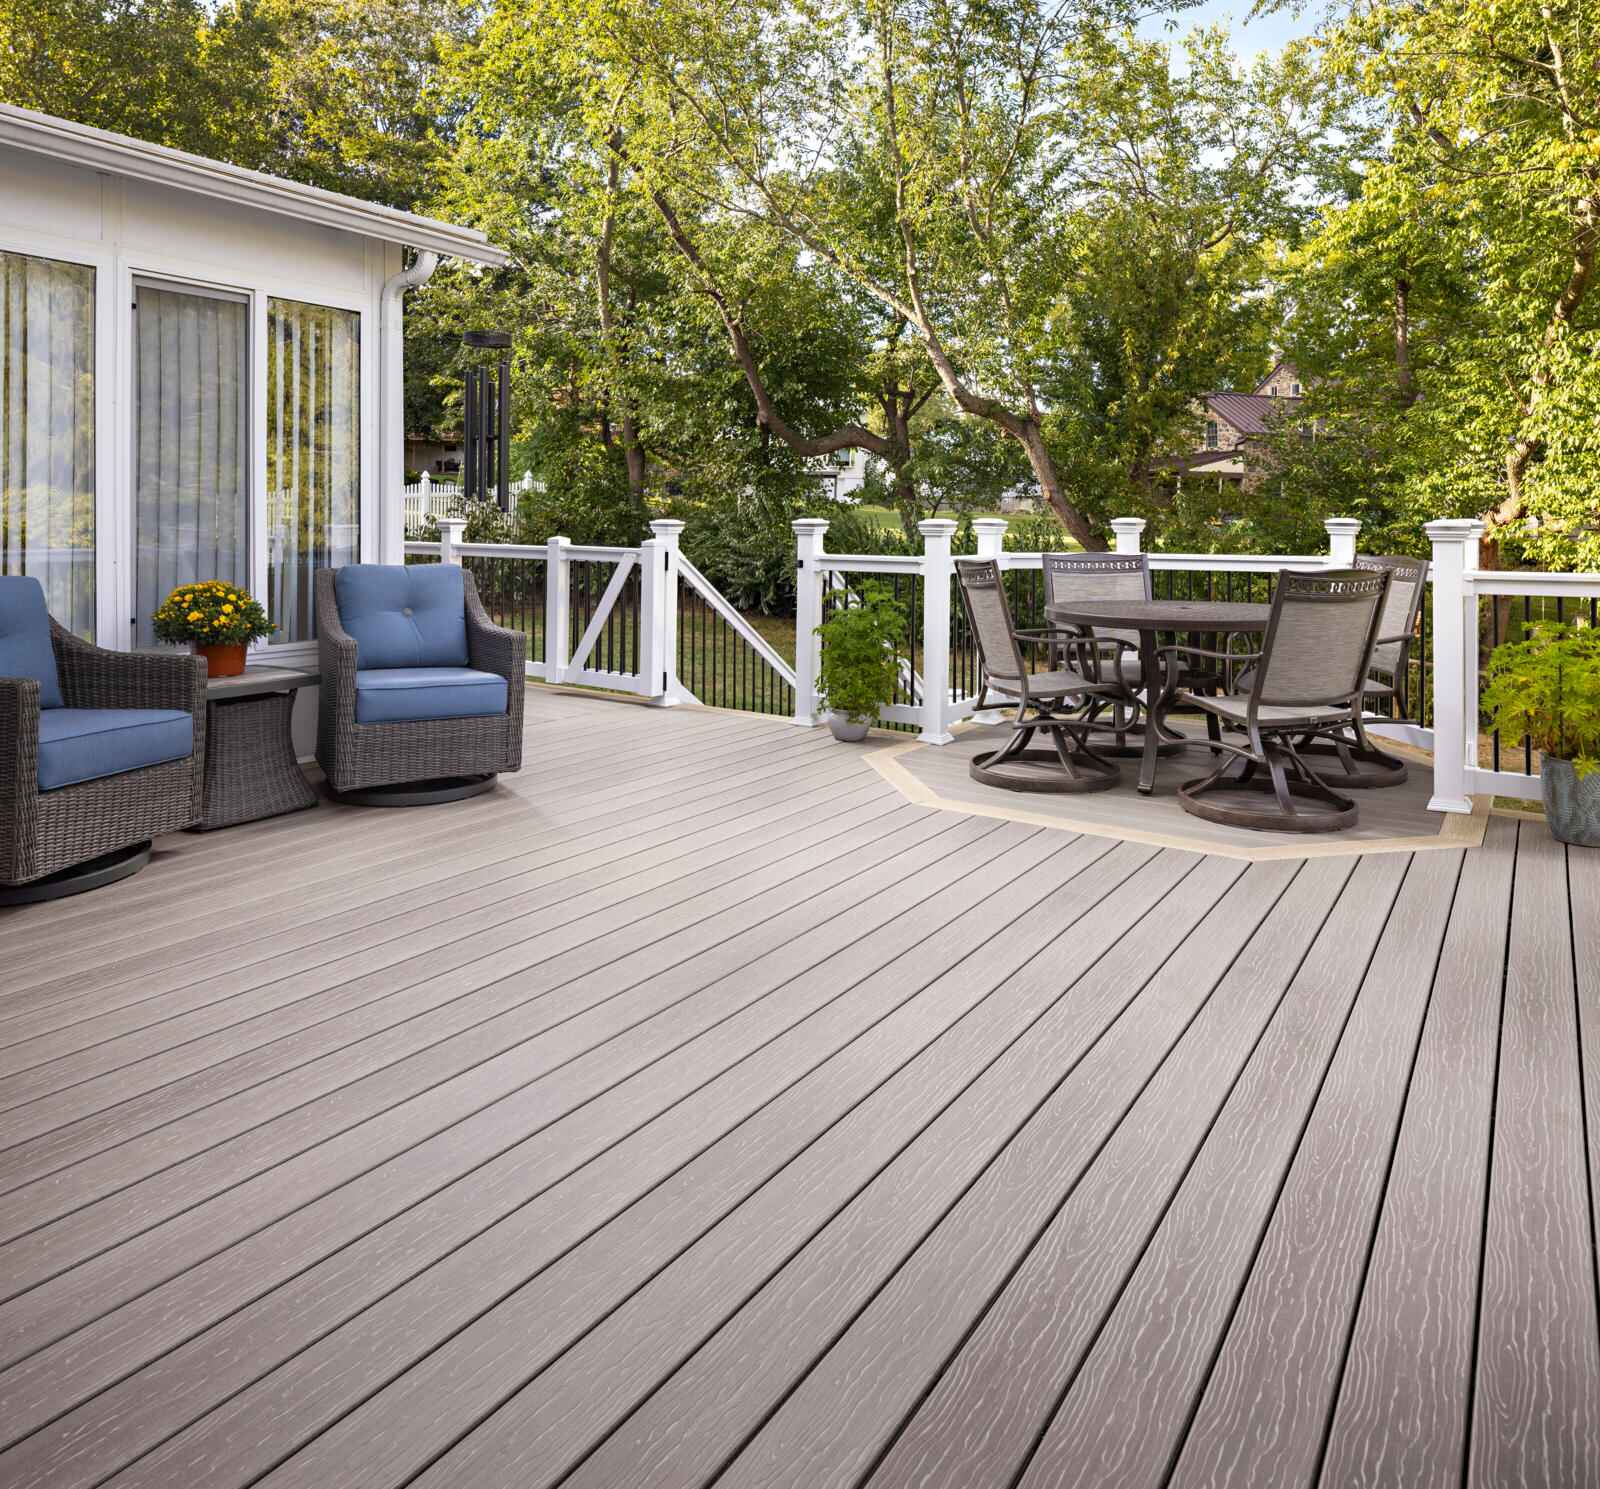 Vision Cathedral Stone Mochaccino Composite Decking